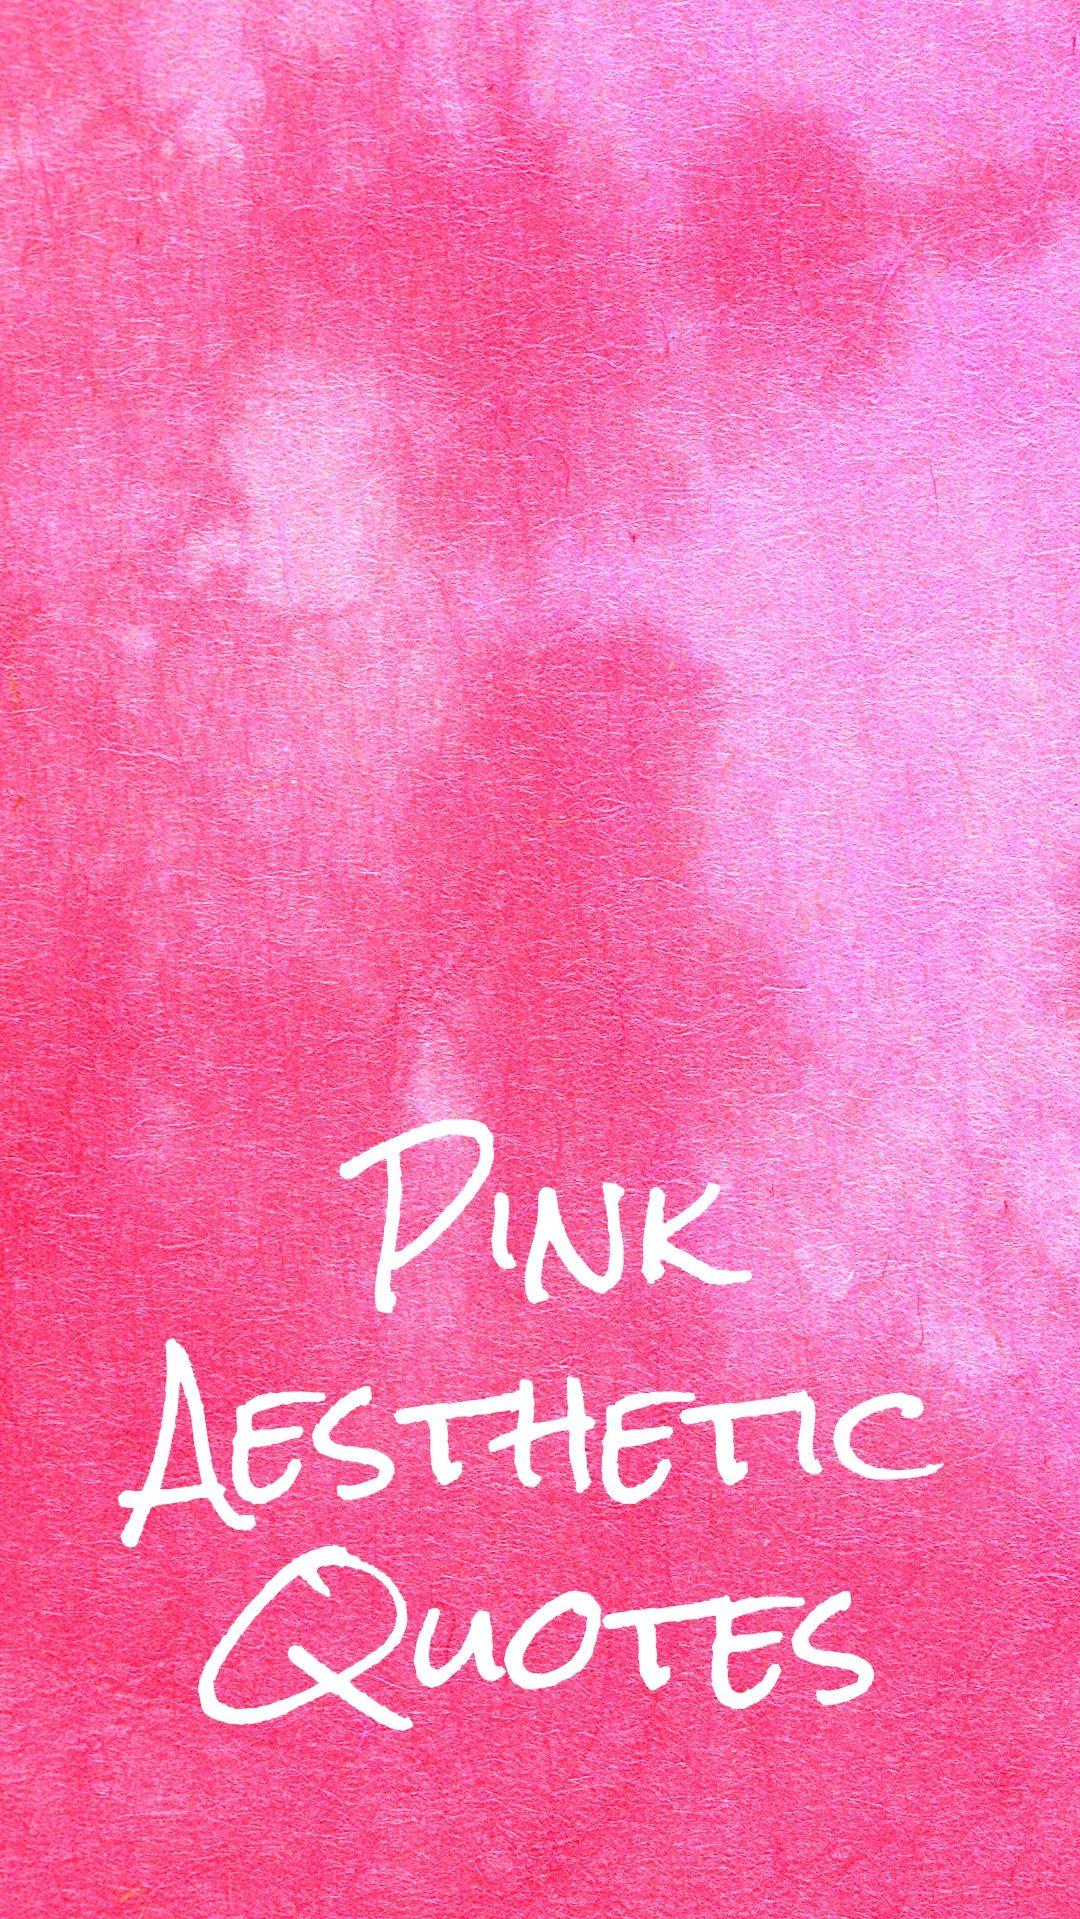 Pink Aesthetic Wallpaper With Quotes And Collages